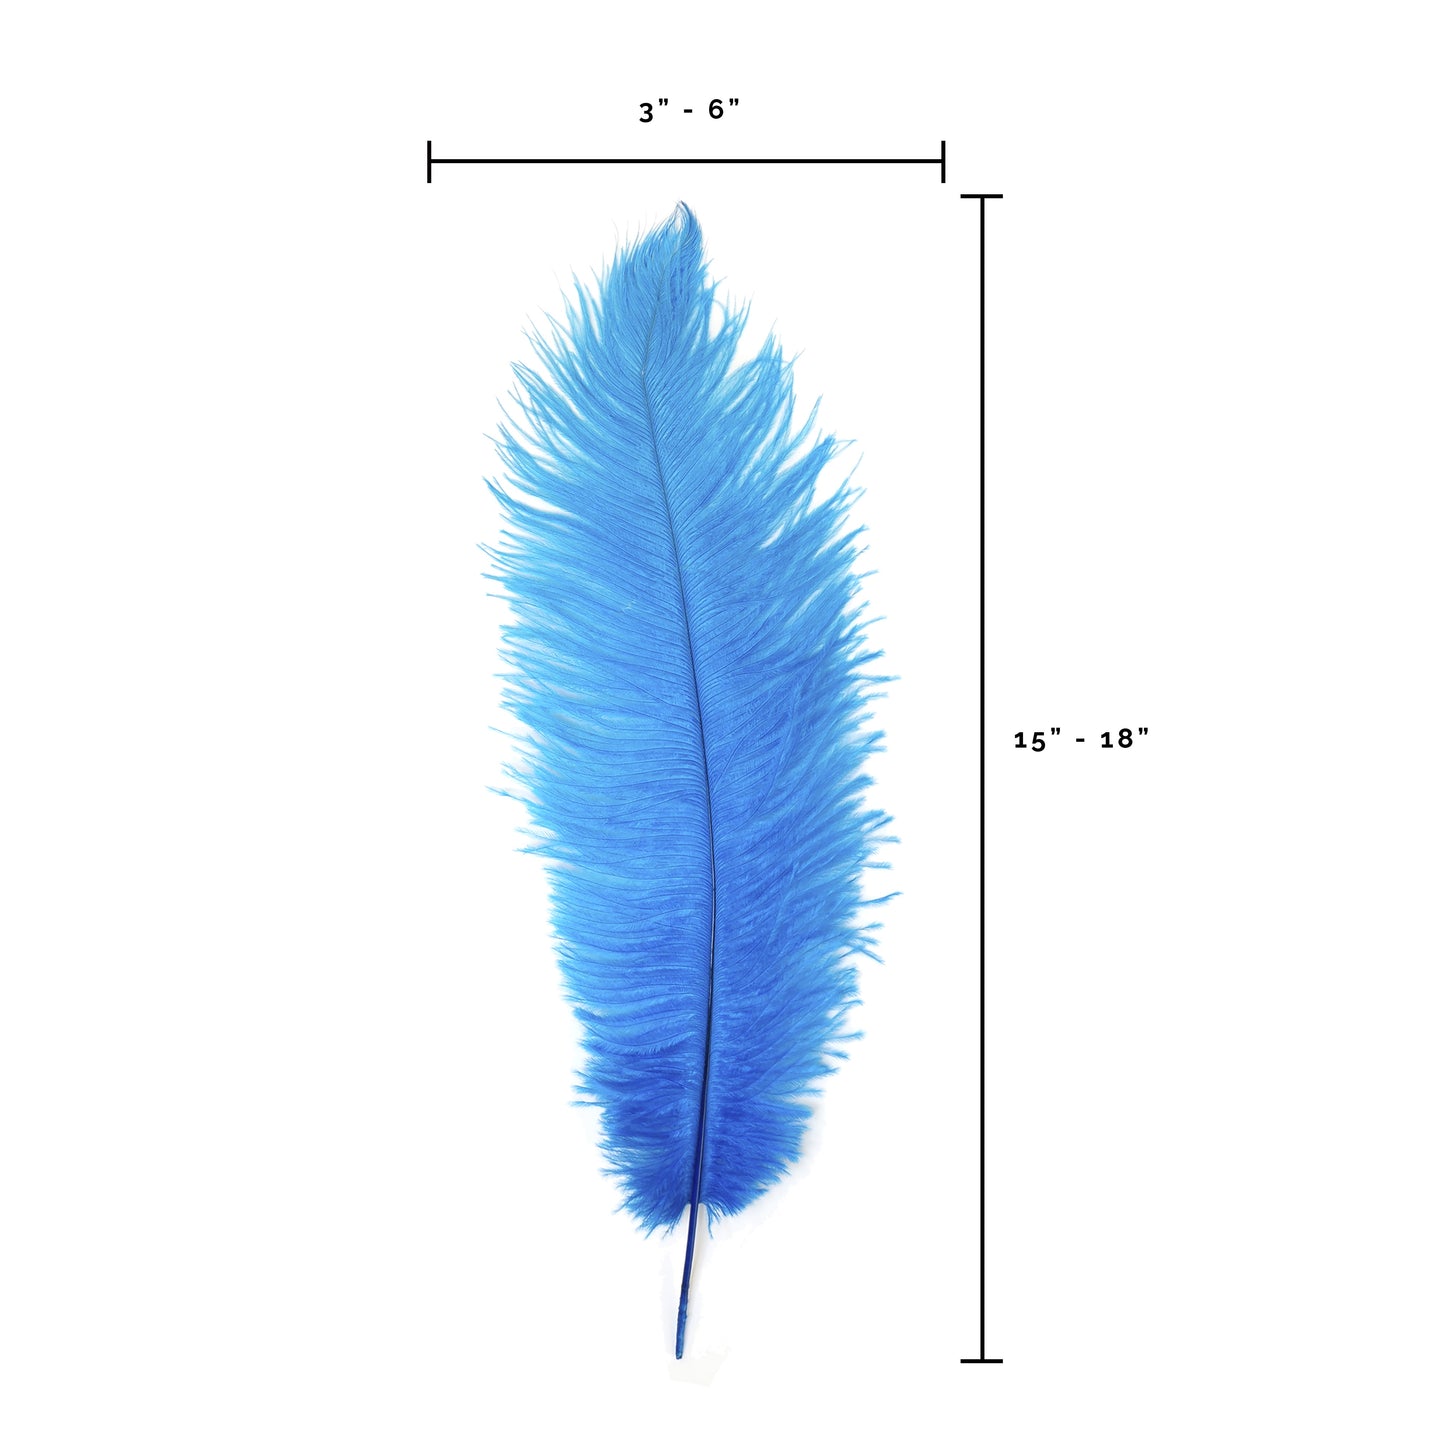 Ostrich Feathers-Narrow Drabs - Dark Turquoise